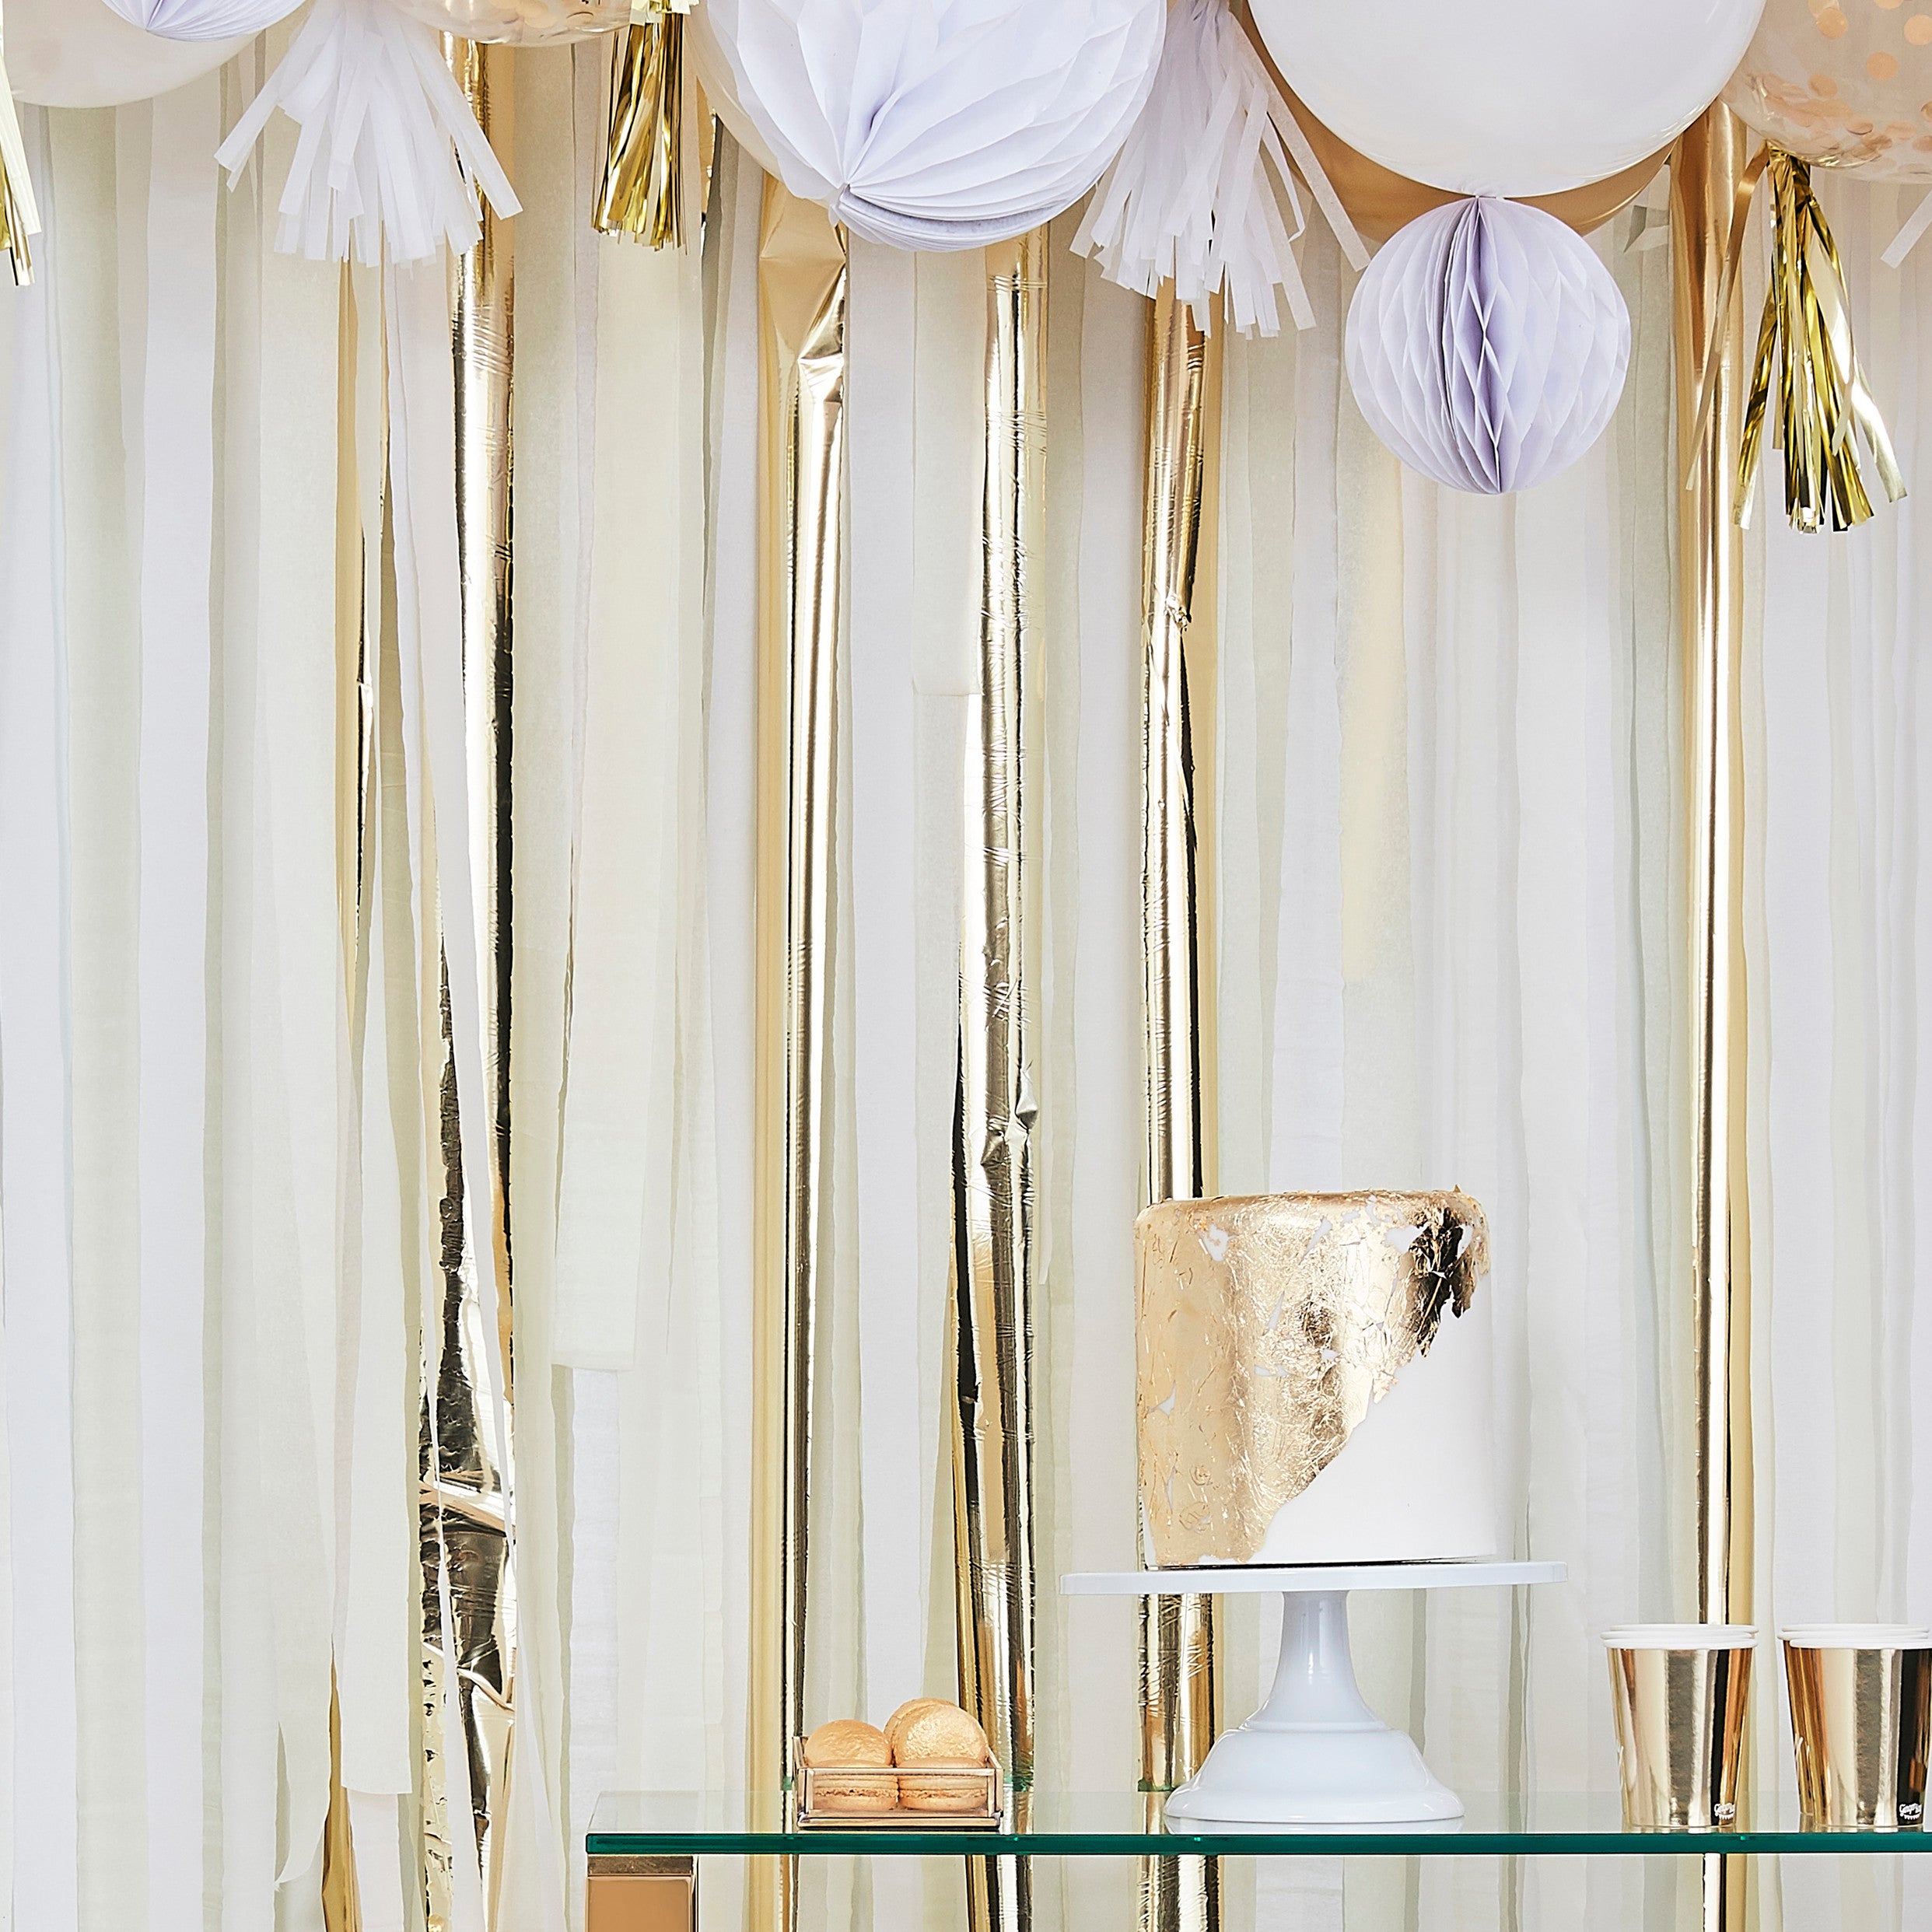 Ginger Ray Gold Metallic Party Streamers Backdrop